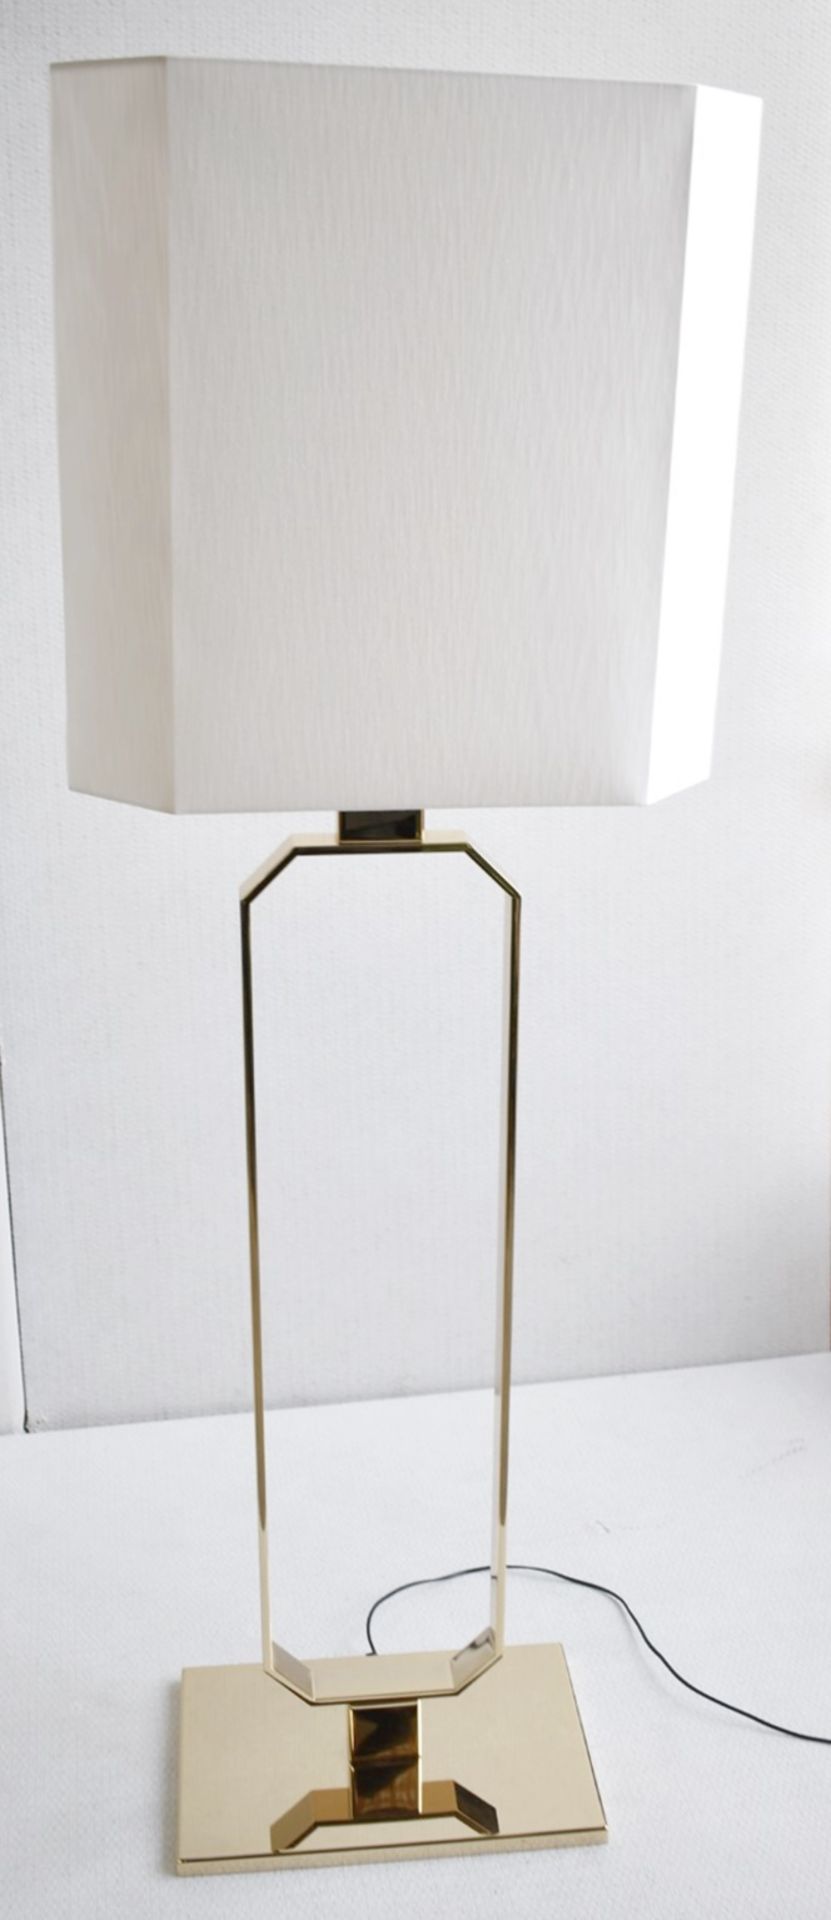 1 x GIORGIO COLLECTION 'Infinity' Freestanding Floor Lamp with Silk Shade - Original Price £6,000 - Image 3 of 15